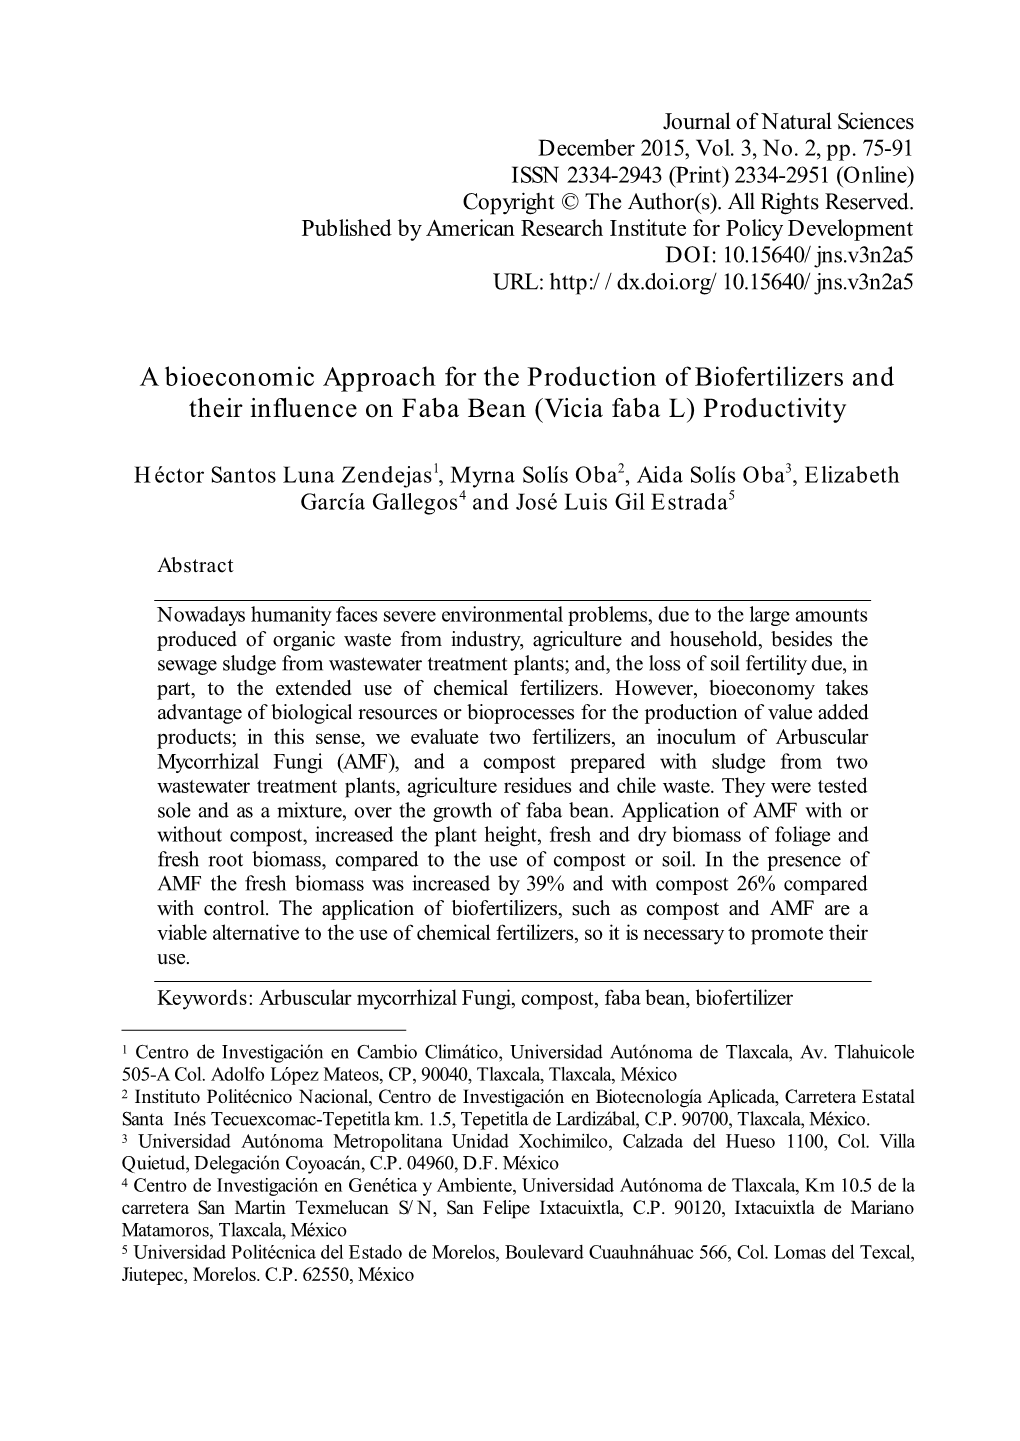 A Bioeconomic Approach for the Production of Biofertilizers and Their Influence on Faba Bean (Vicia Faba L) Productivity